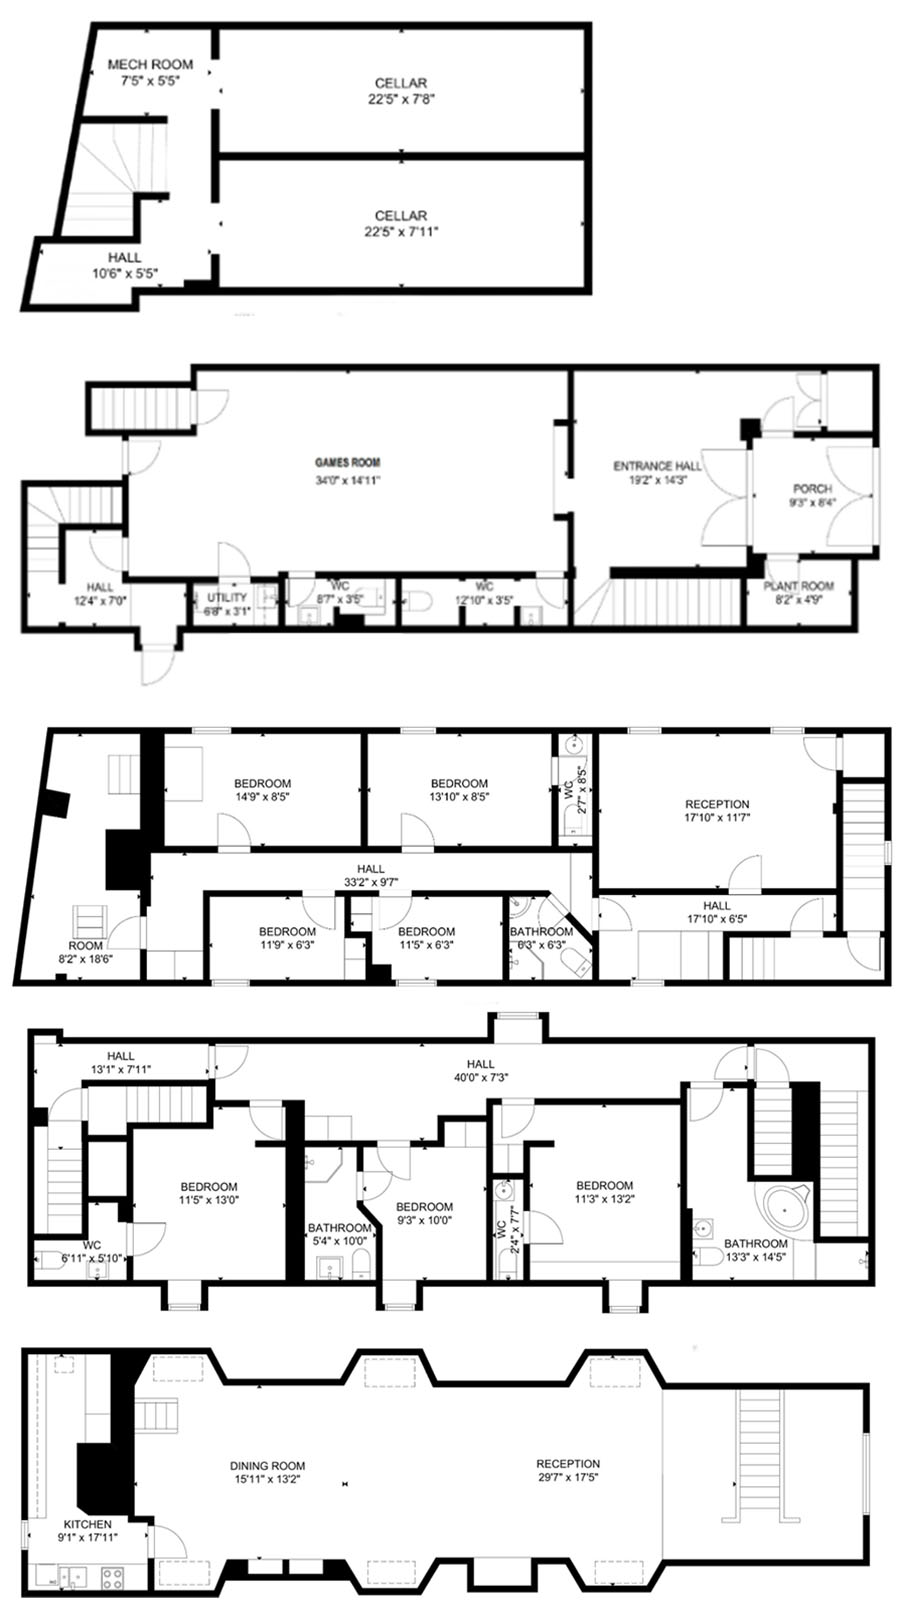 Floorplan of Former Malthouse For Sale In Powys